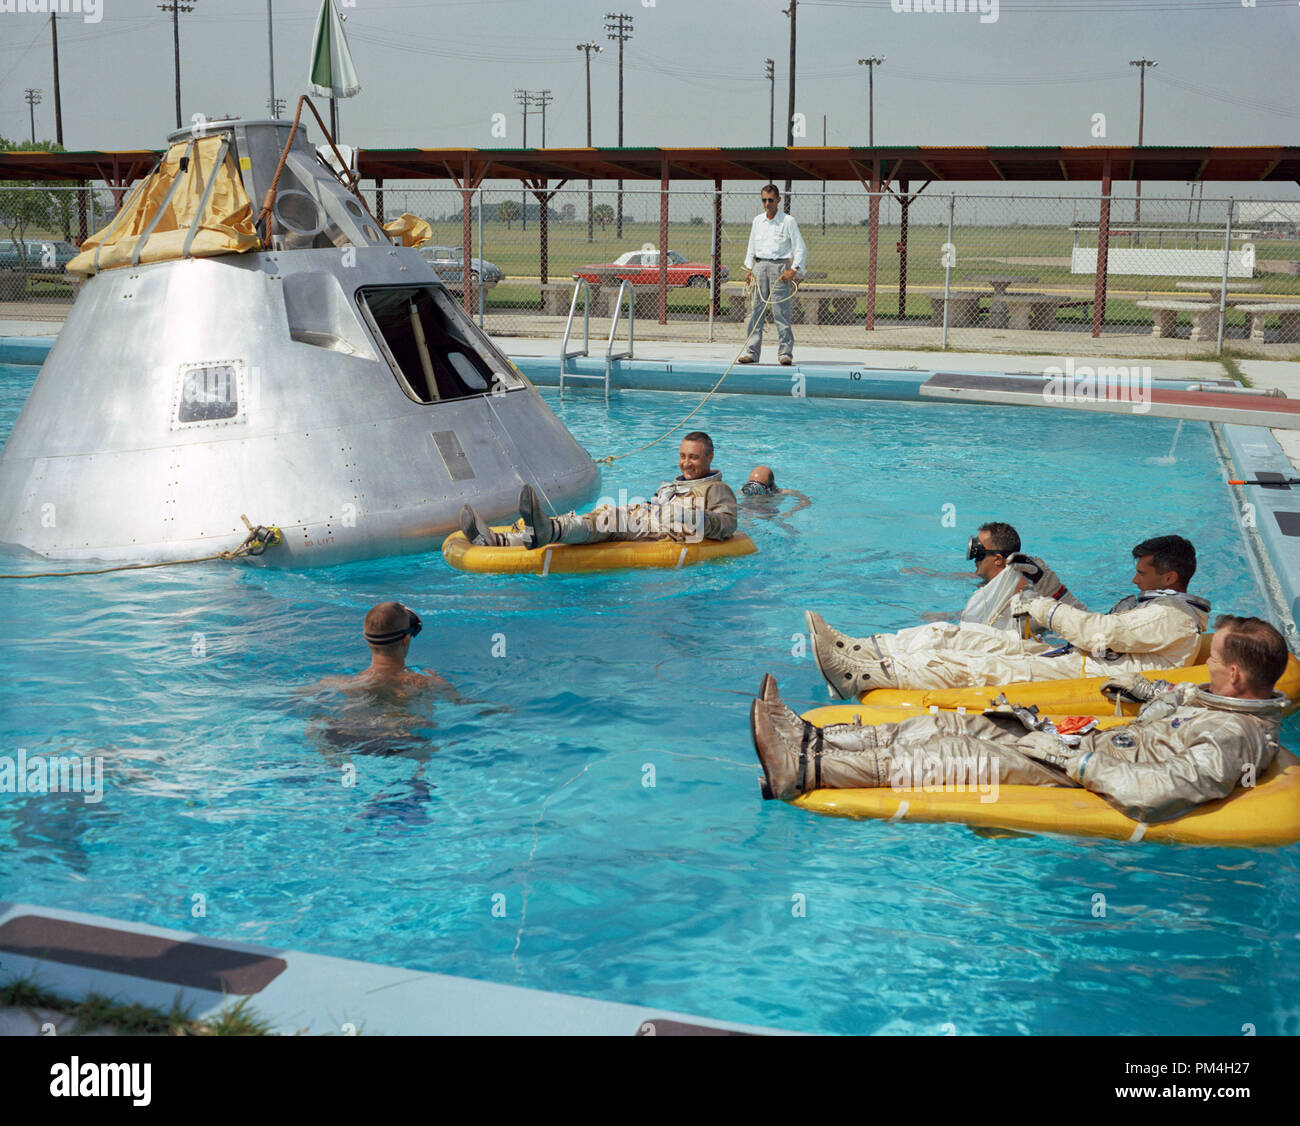 (June 1966) --- Prime crew for the first manned Apollo mission practice water egress procedures with full scale boilerplate model of their spacecraft. In the water at right is astronaut Edward H. White (foreground) and astronaut Roger B. Chaffee. In raft near the spacecraft is astronaut Virgil I. Grissom. NASA swimmers are in the water to assist in the practice session that took place at Ellington AFB, near the Manned Spacecraft Center, Houston.   File Reference # 1003 187THA Stock Photo